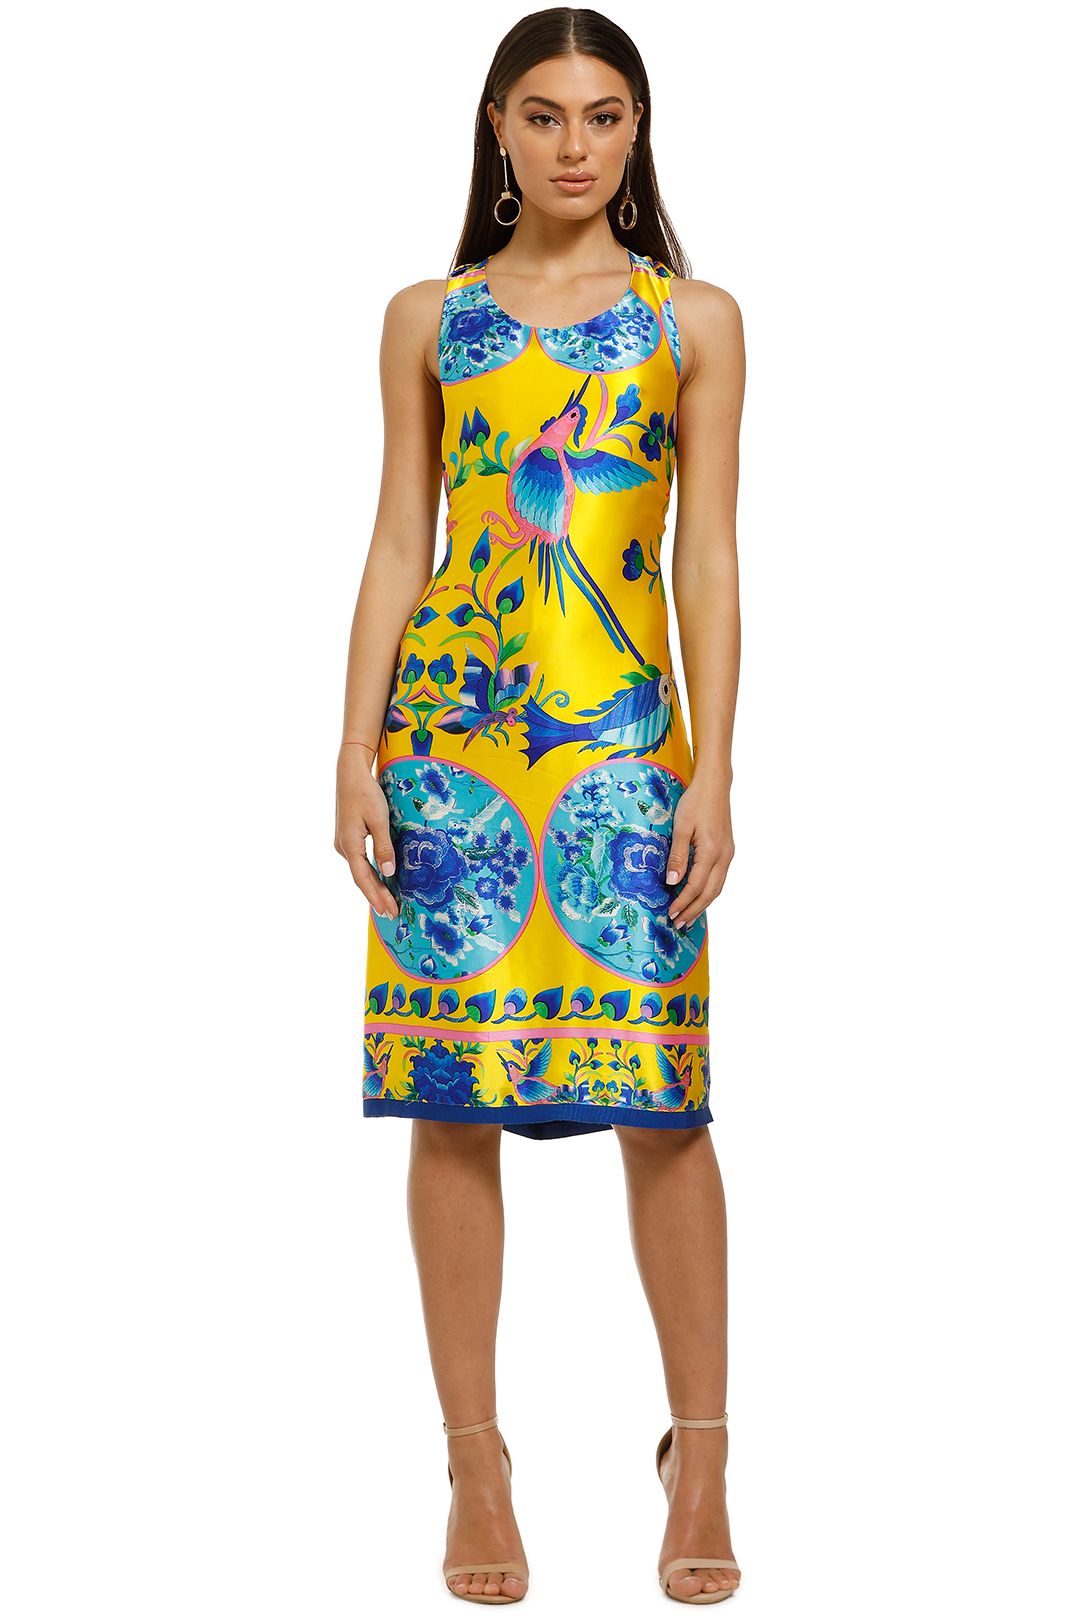 Cooper-by-Trelise-Cooper-Burning-Bright-Dress-Yellow-Print-Front